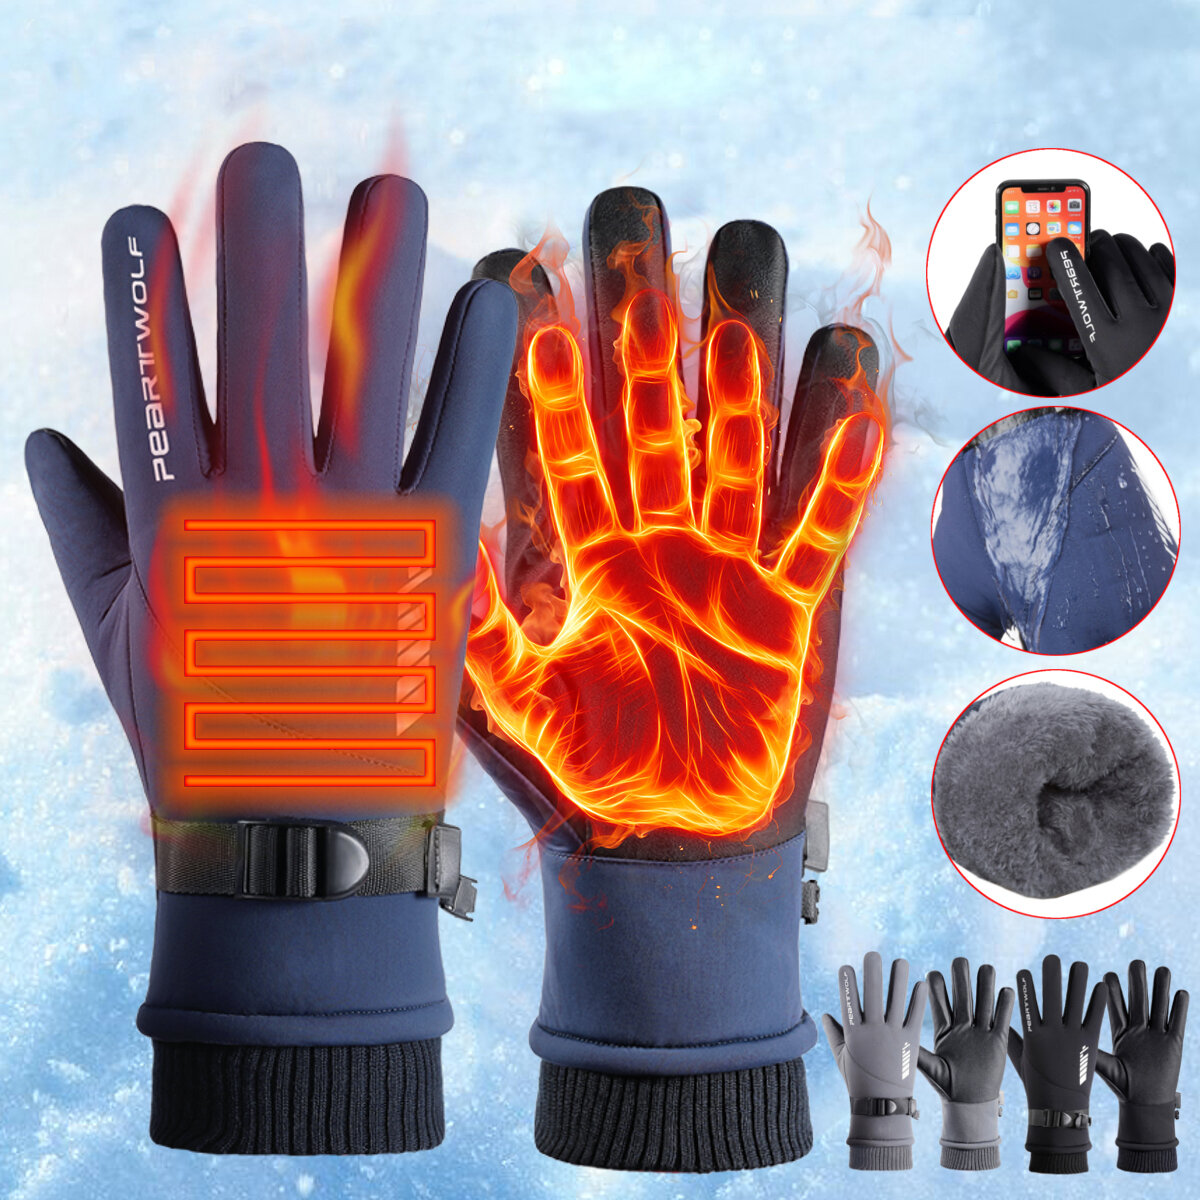 Outdoor Skiing Warm Fleece Gloves Waterproof Motocycle Touch Screen Gloves Motorbike Racing Riding Winter Gloves